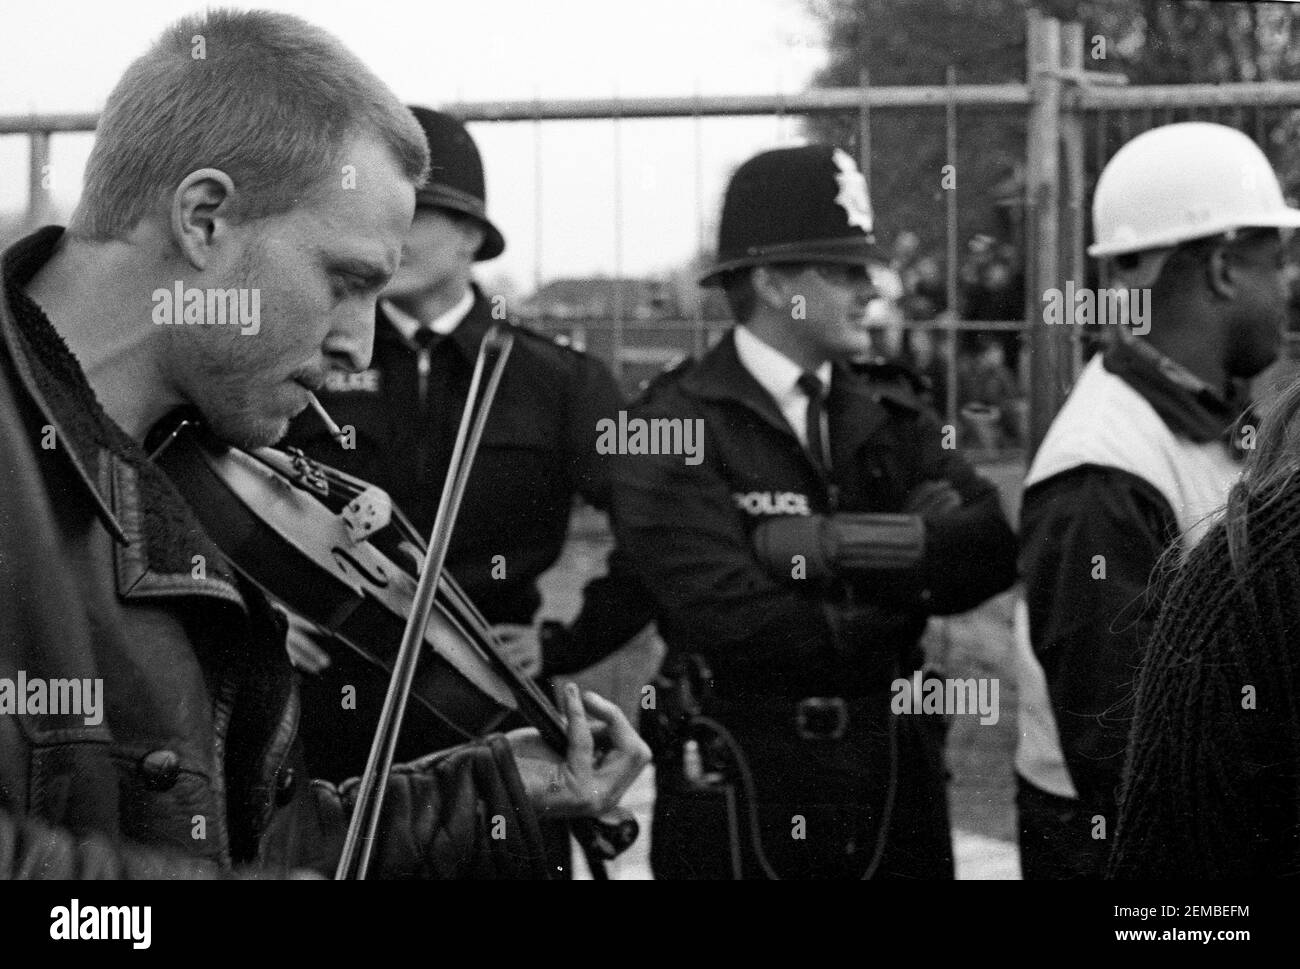 Fiddle players watched by Metropolitan Police officers at an anti roads protest in Wanstead, East London as part of the No M11 Link Road Campaign of direct action against the M11 Link Road road construction in 1994 Stock Photo